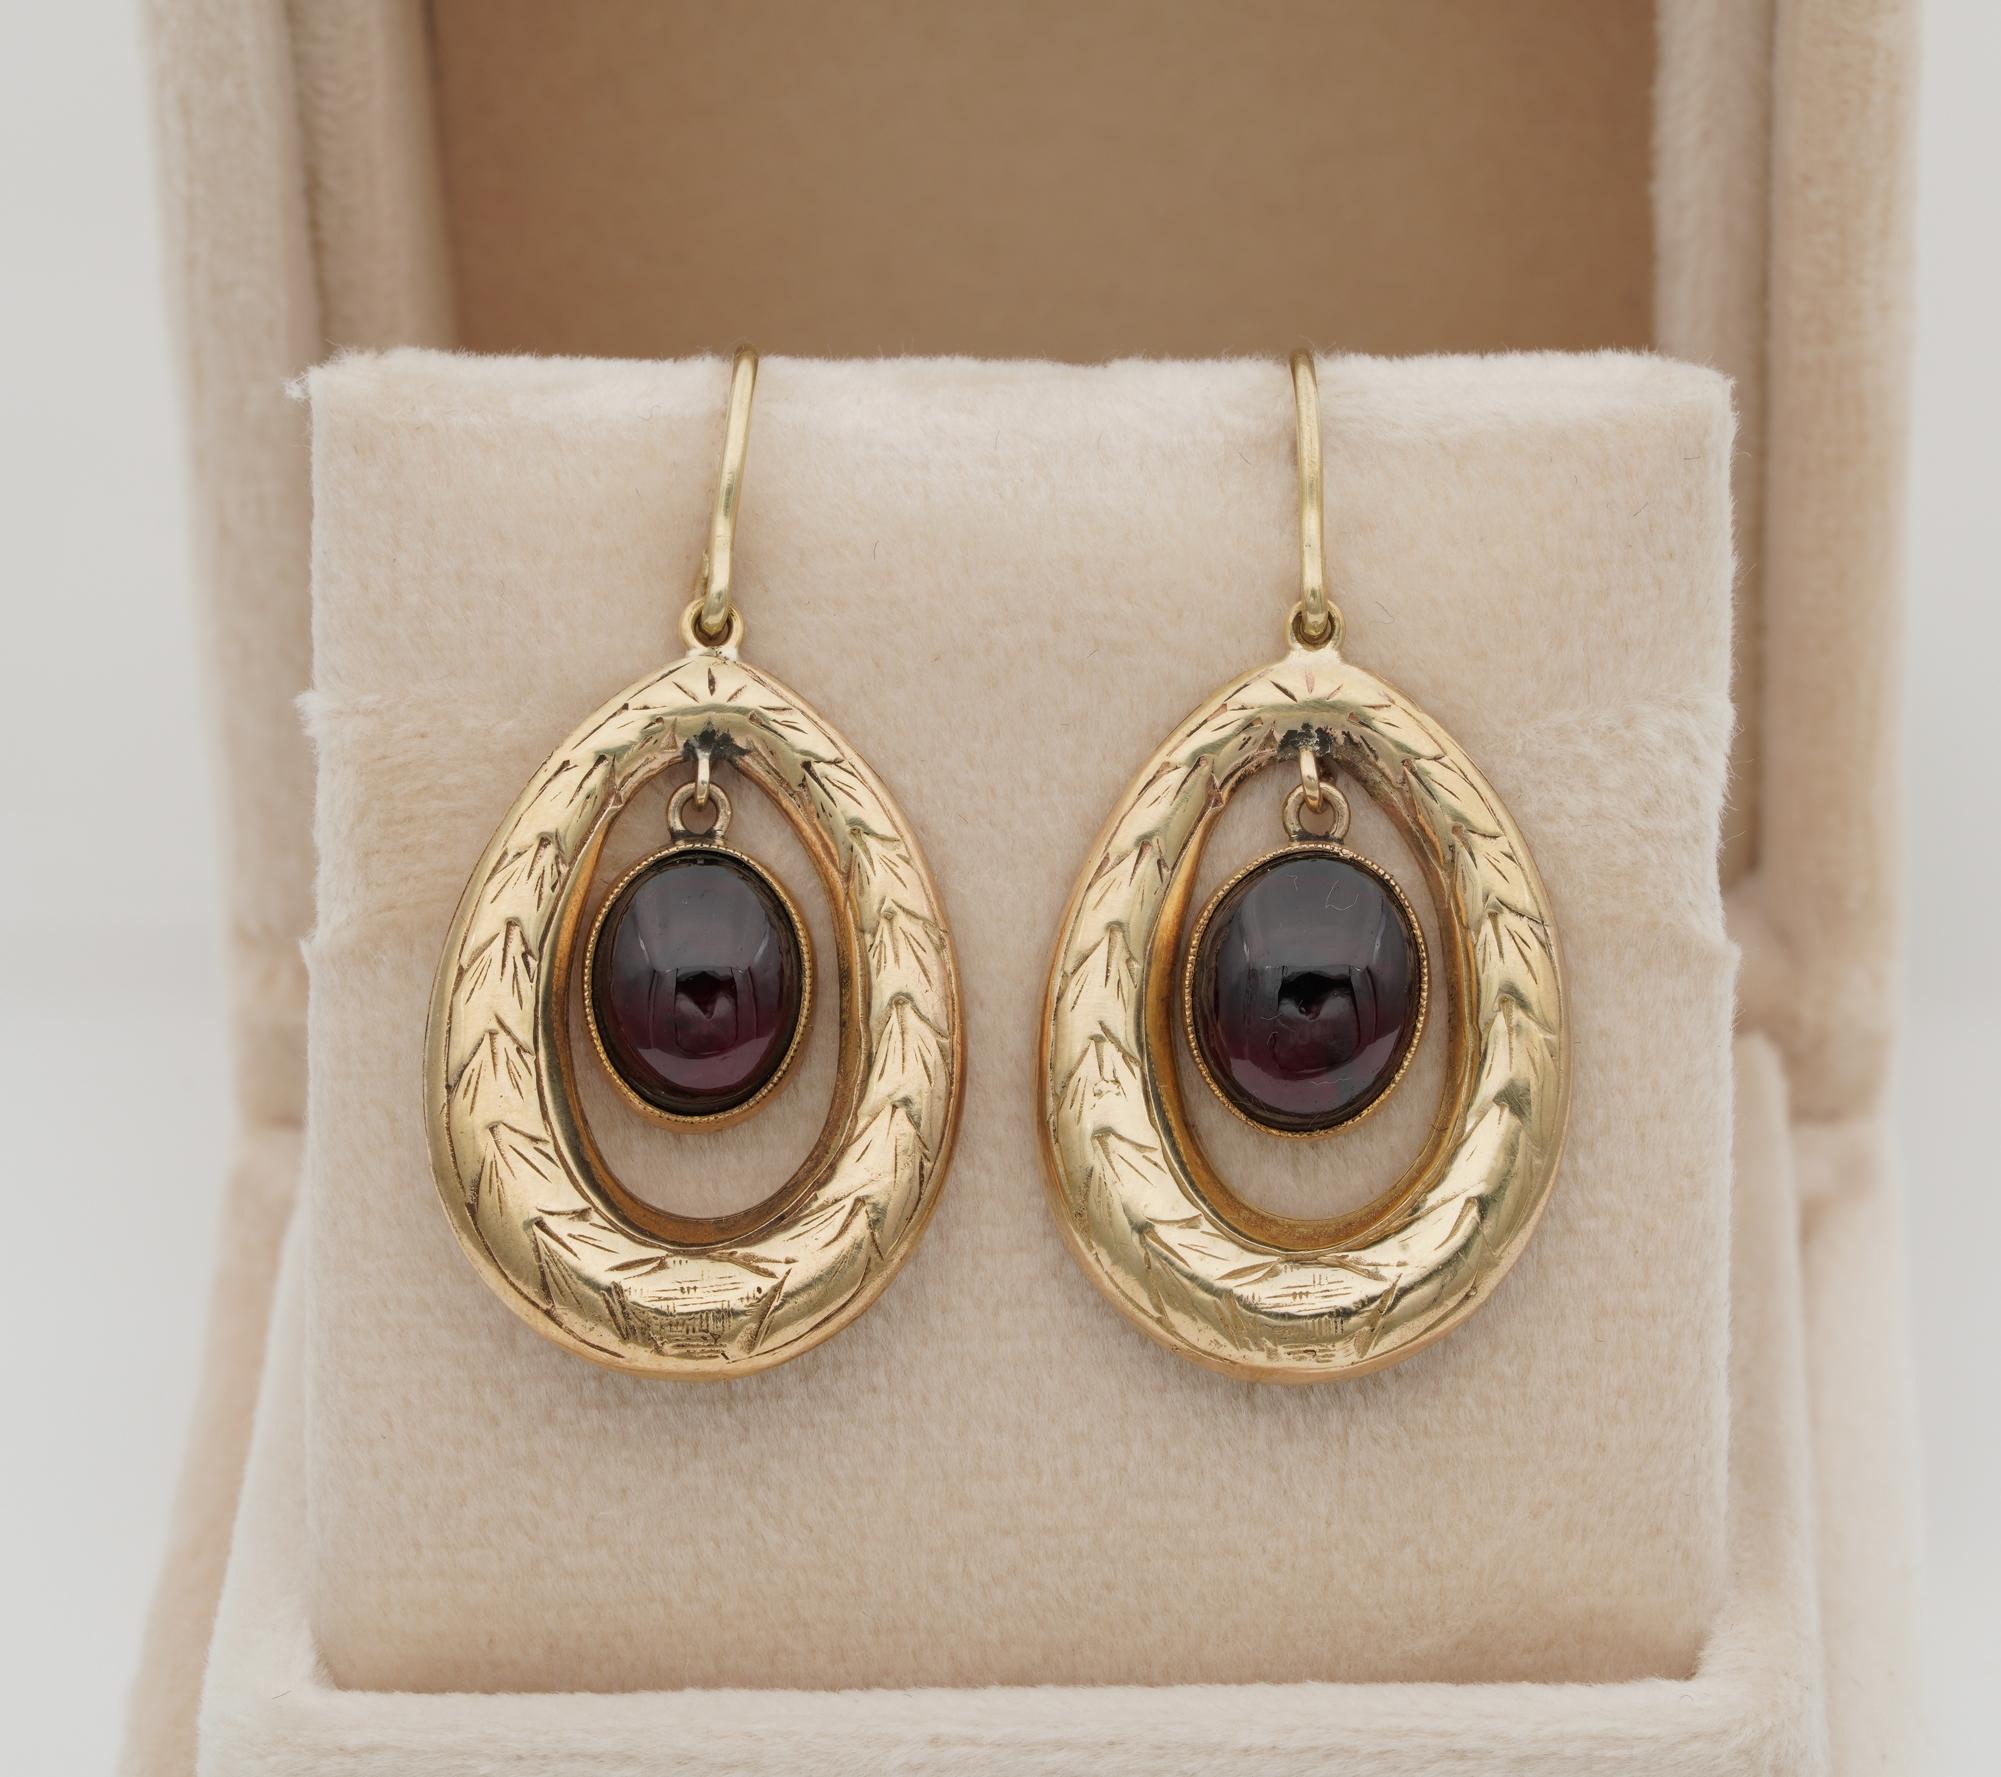 Beautiful pair of Victorian period Garnet Drop earrings
Timeless in beauty designed in a carved Wreath of gold framing the swinging drop of Garnet attracting the attention with the fabulous Bohemian Red glowing in the gold
The two spectacular